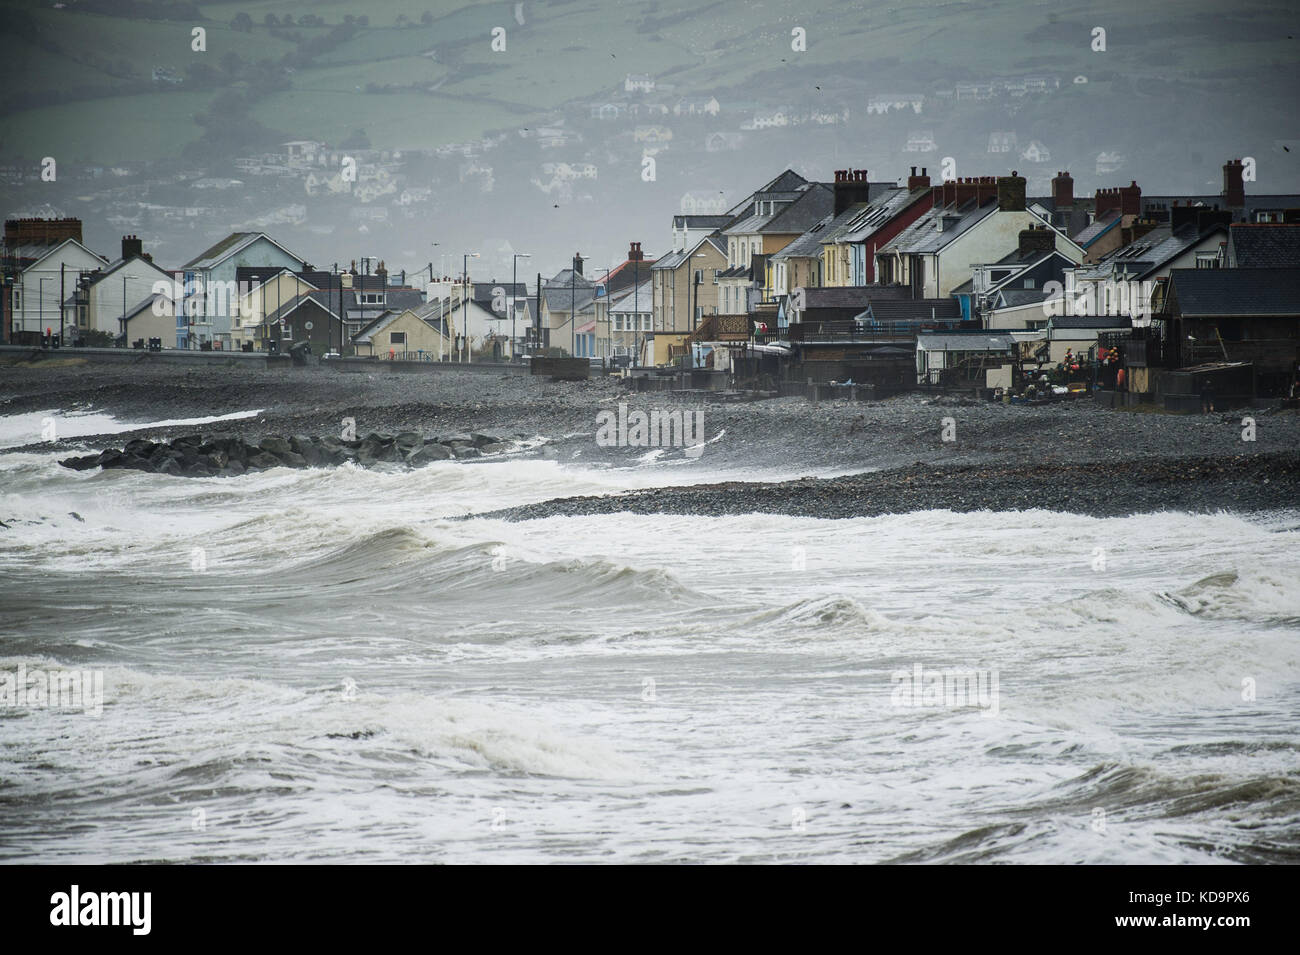 Aberystwyth Wales UK, Wednesday 11 October 2017 UK Weather: Stormy seas and gale force winds strike the beach and coastal properties in the low lying village of Borth, just north of Aberystwyth, on the Cardigan Bay coast of west wales. The Met Office has issued a yellow warning for much of north west Wales, with the risk of flooding and disruption to traffic Photo Credit: Keith Morris/Alamy Live News Stock Photo